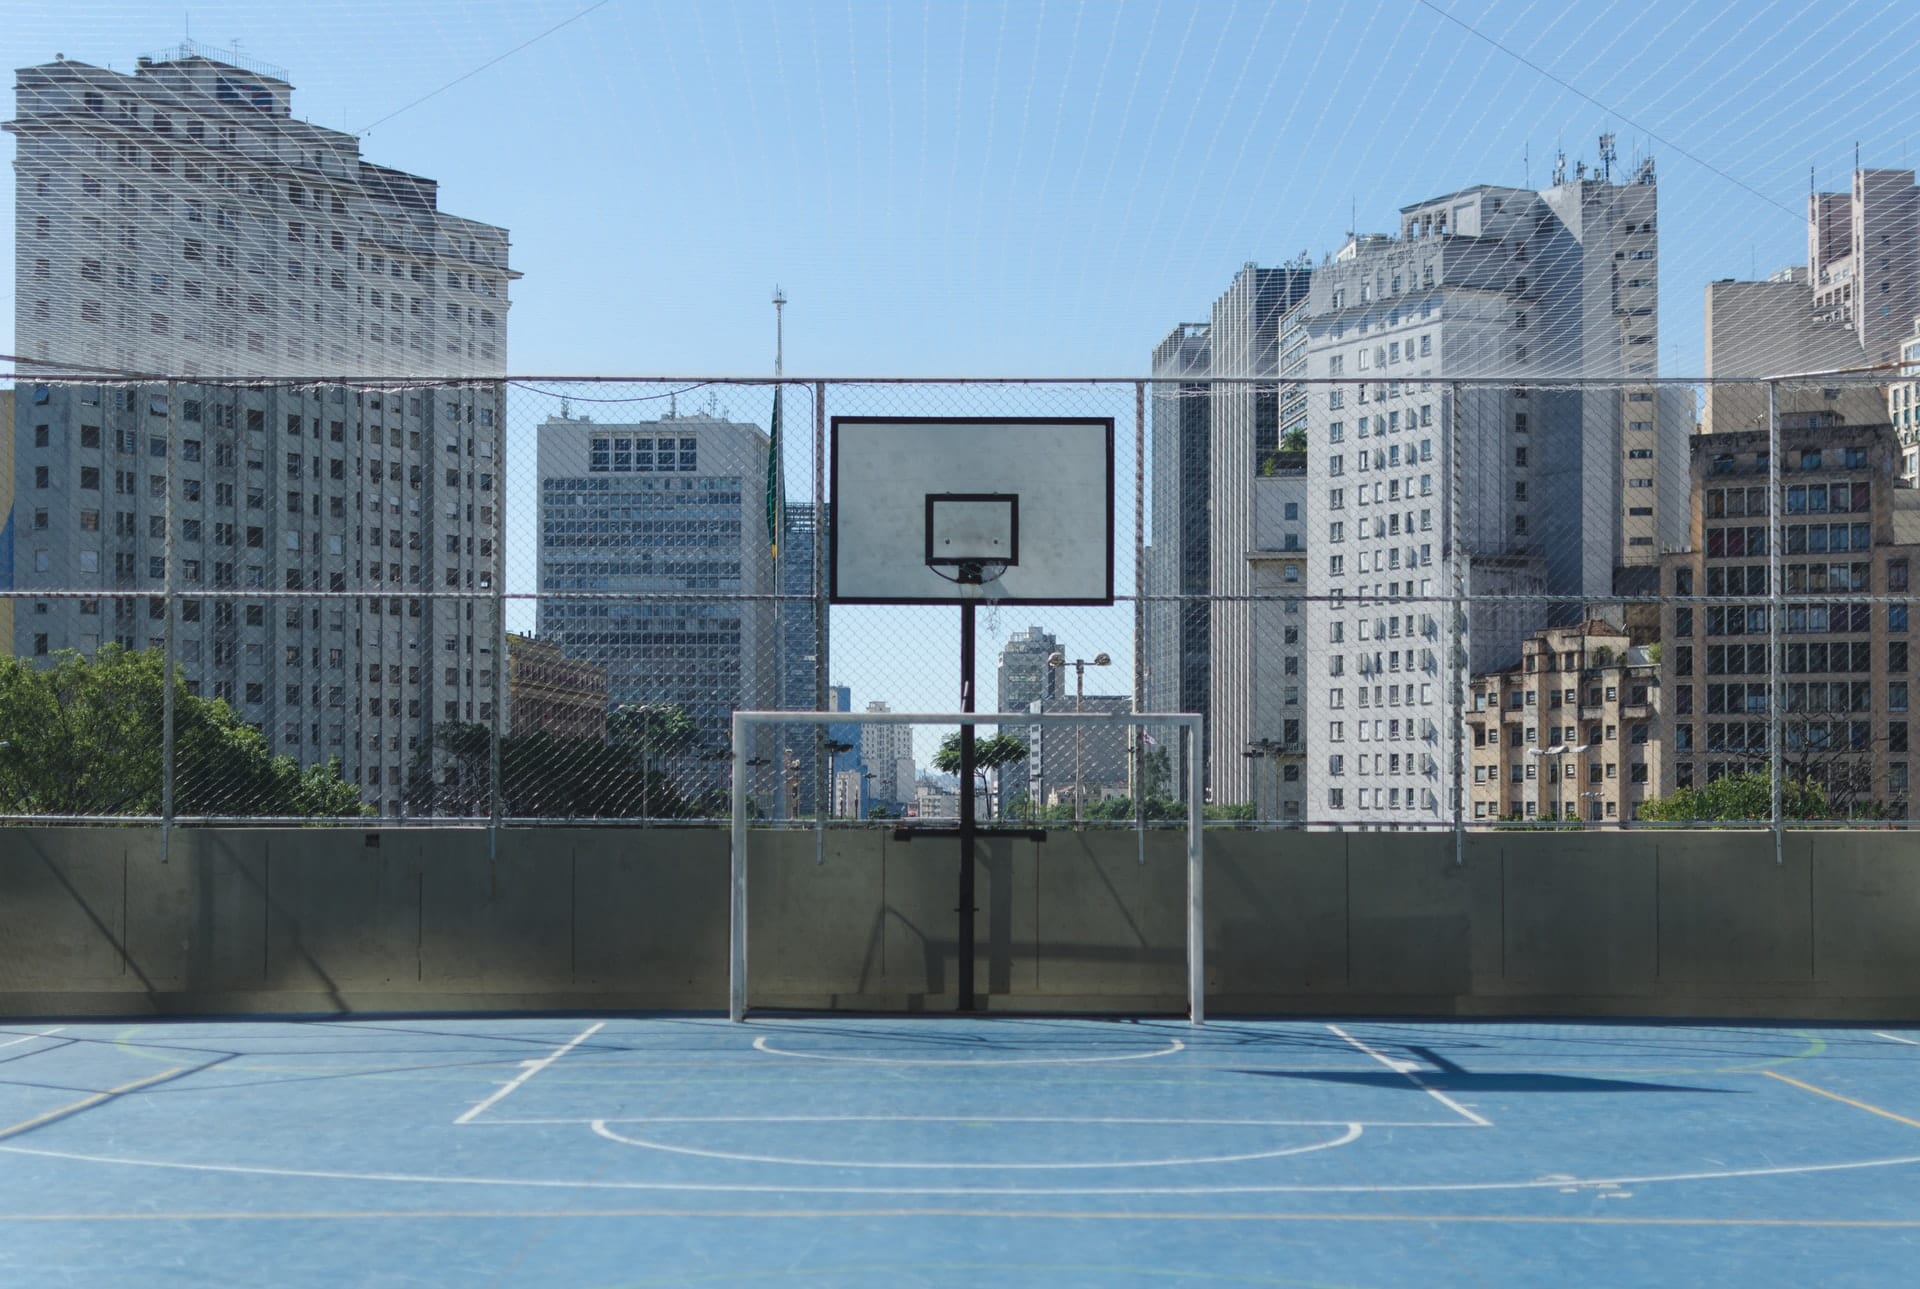 How Much Does it Usually Cost to Build a Basketball Court (2)